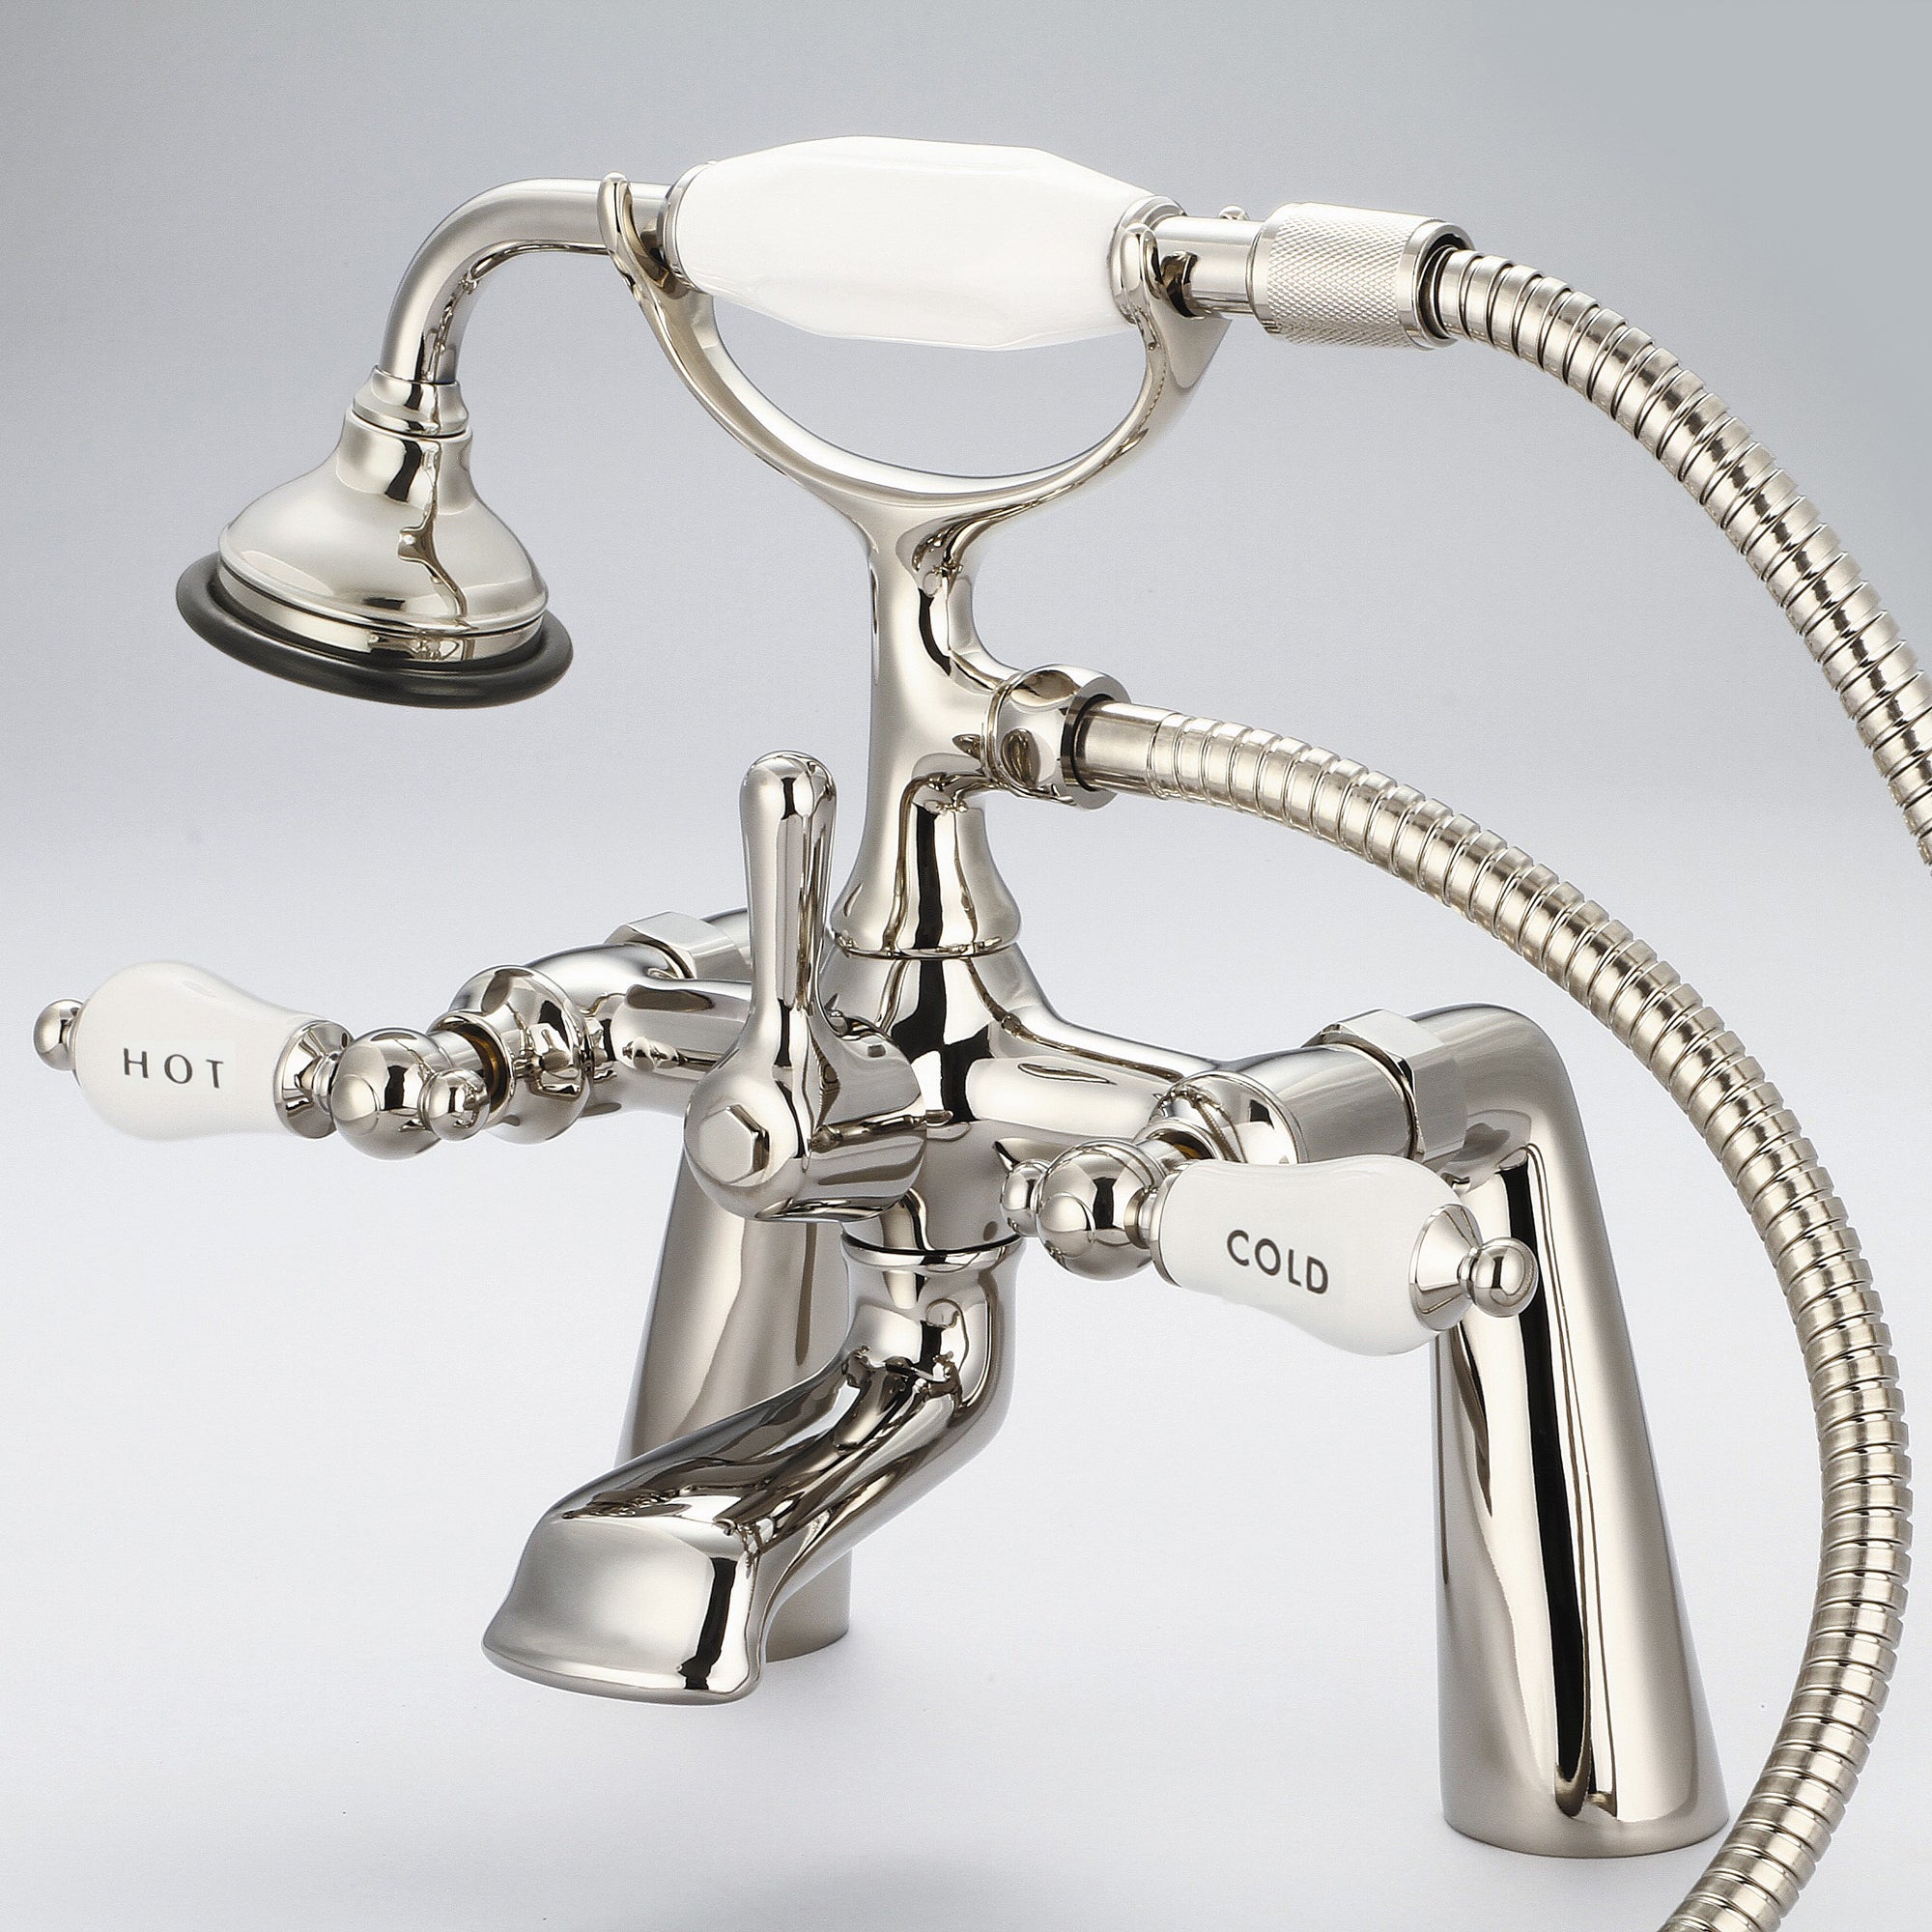 Water Creation | Vintage Classic 7 Inch Spread Deck Mount Tub Faucet With Handheld Shower in Polished Nickel (PVD) Finish With Porcelain Lever Handles, Hot And Cold Labels Included | F6-0003-05-CL